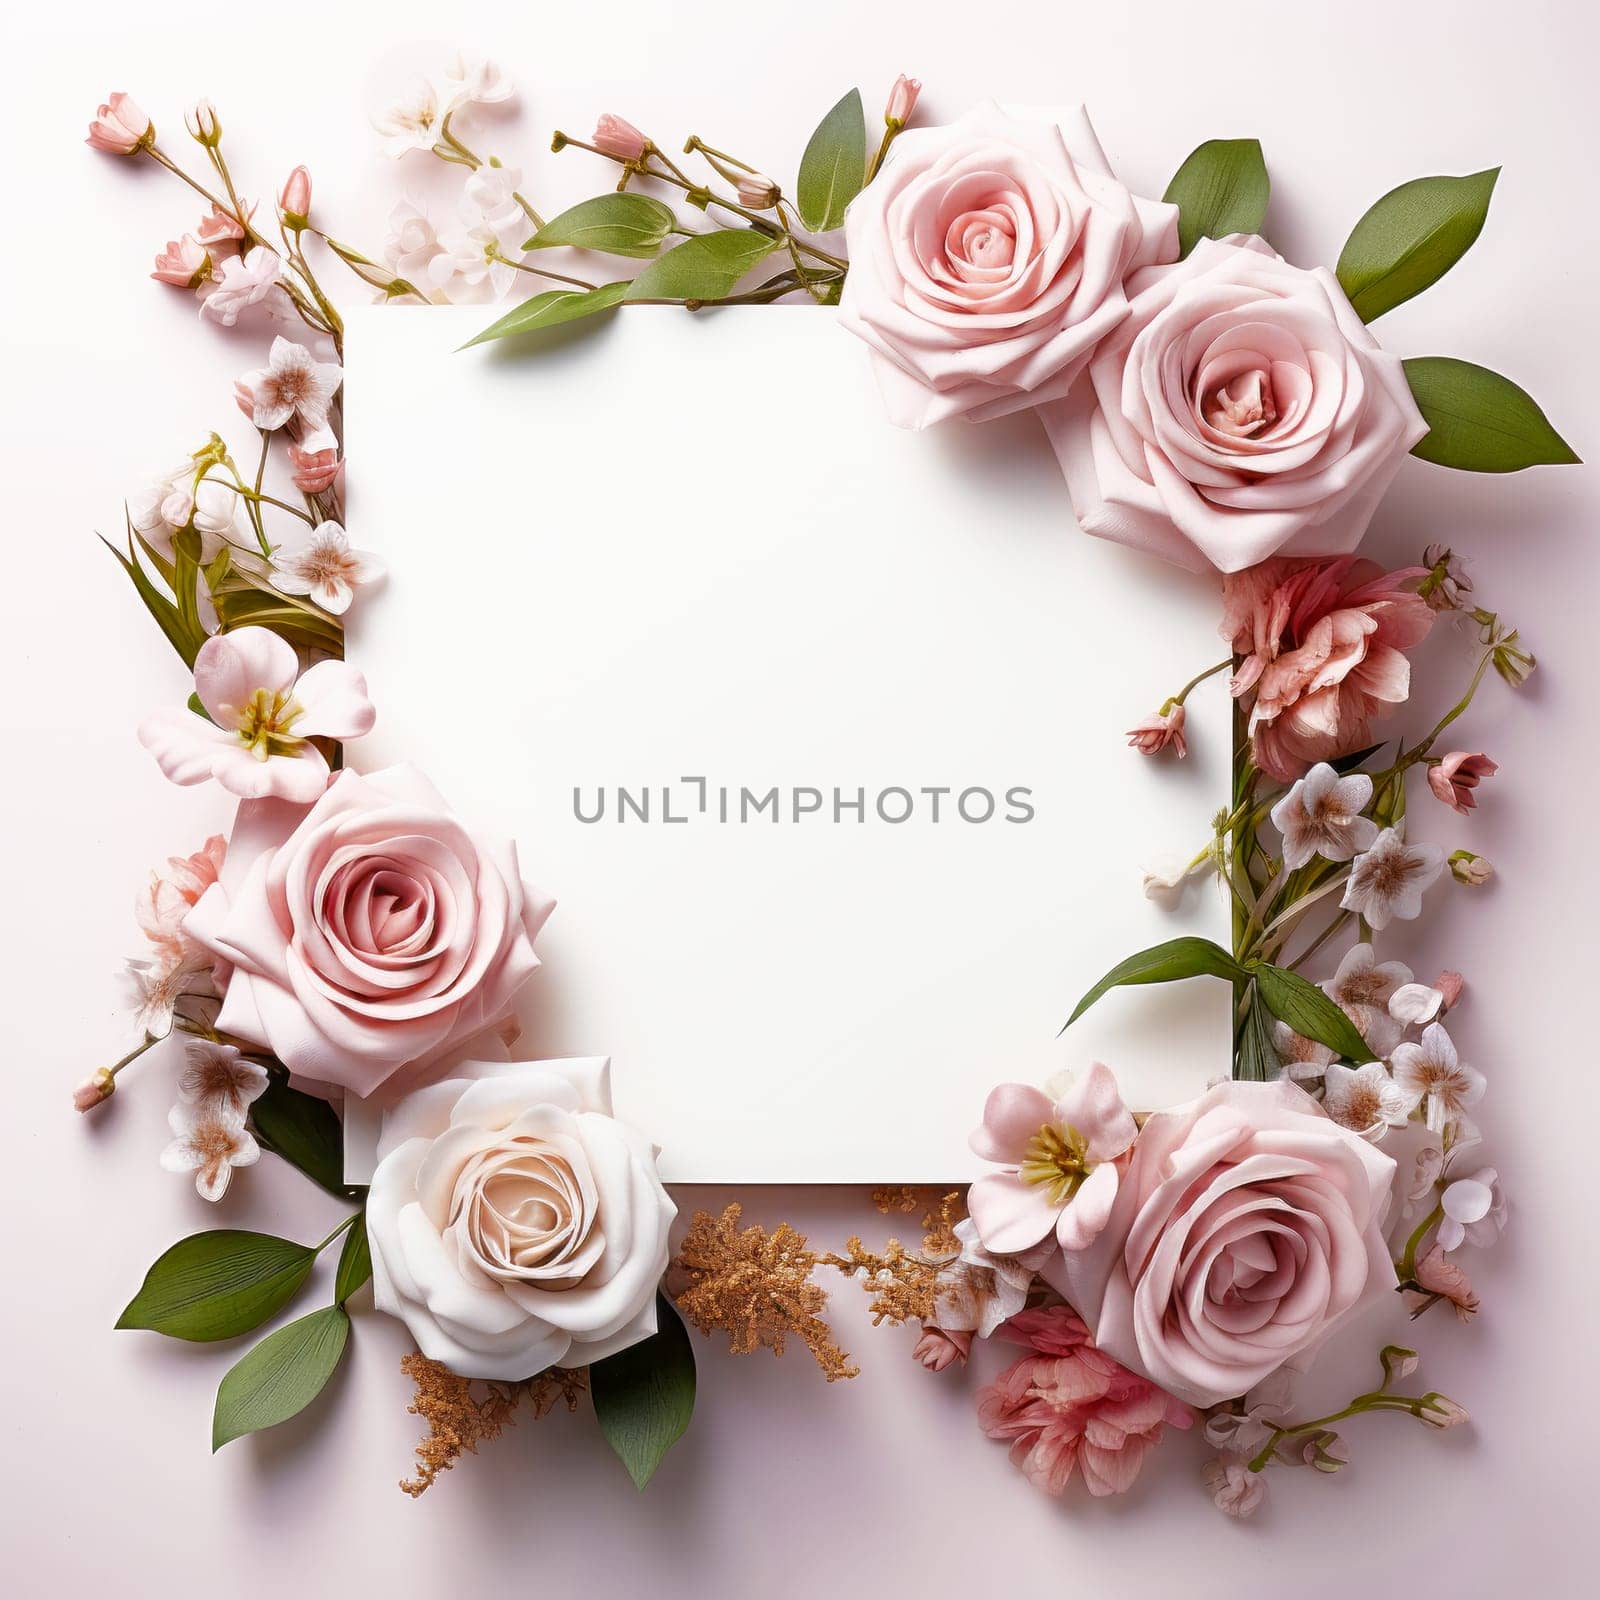 Frame of roses, set of roses and flowers floral wreath or picture invitation greeting card mockup by NataliPopova